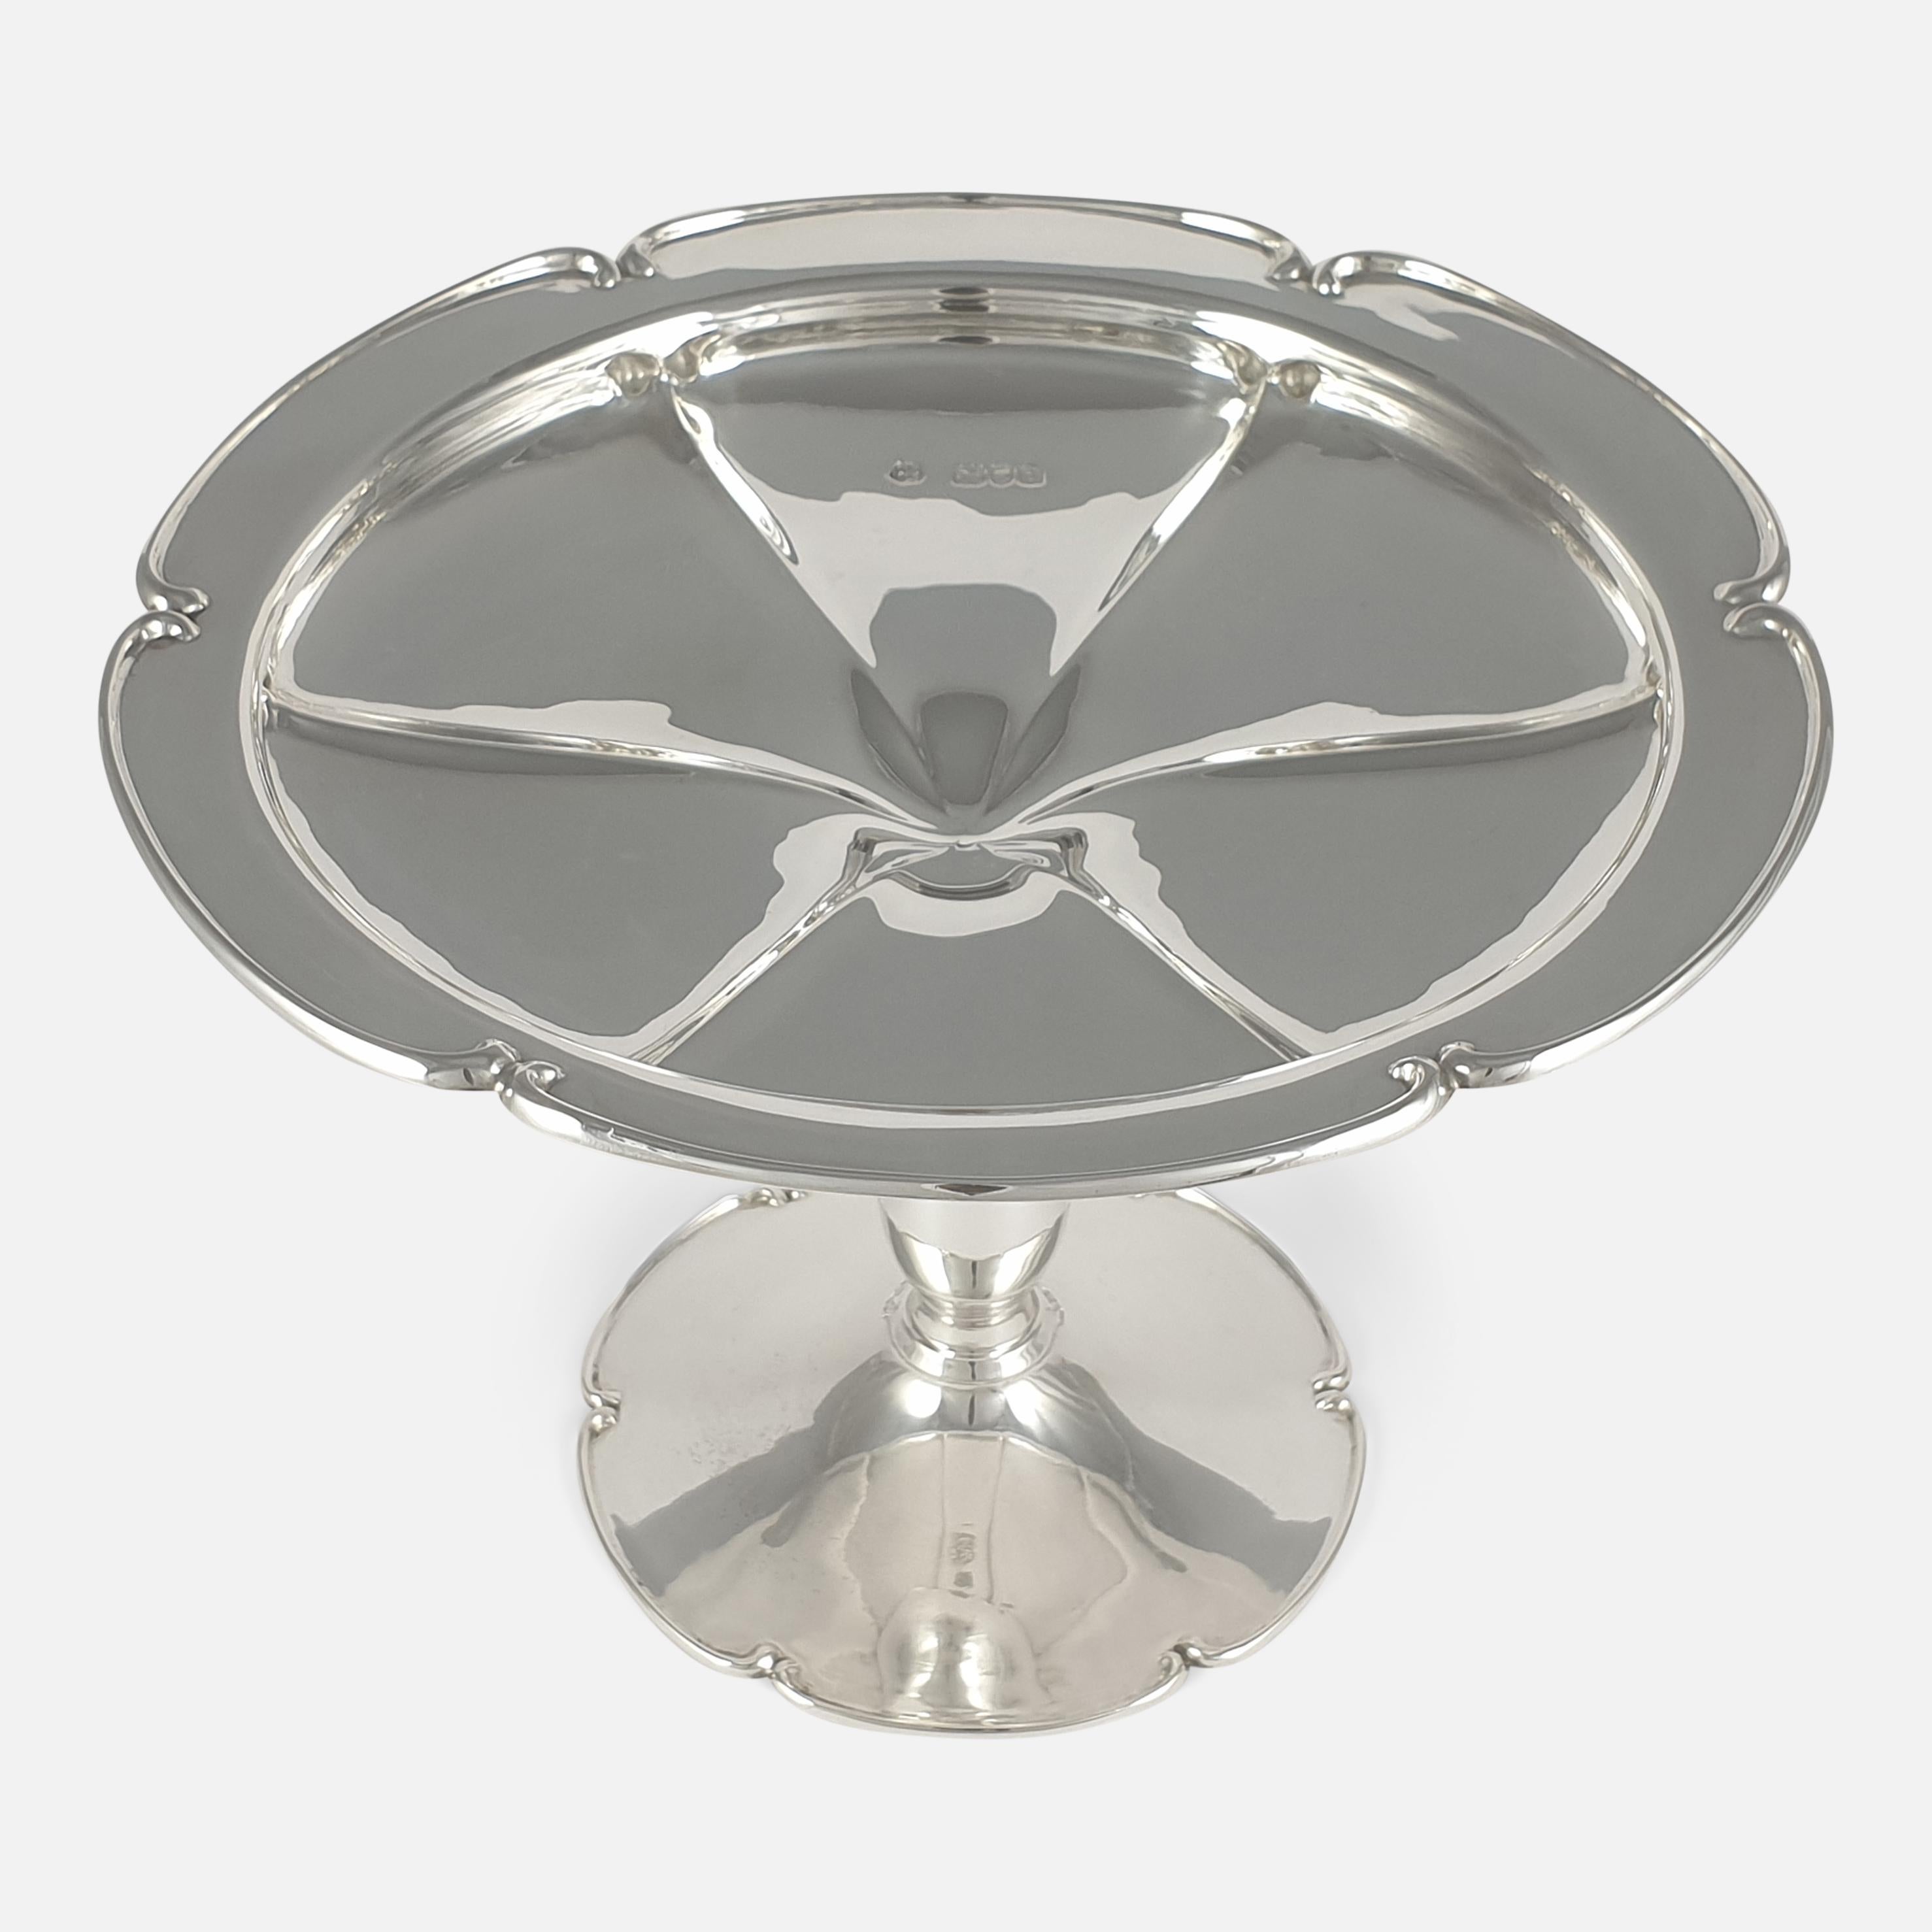 An Edwardian Art Nouveau sterling silver Tazza by R & W Sorley, London 1901. The Tazza bowl is of shaped and lobed circular form, leading to a elongated stem on a spreading foot. The Tazza is hallmarked with the makers mark of R & W Sorley, London